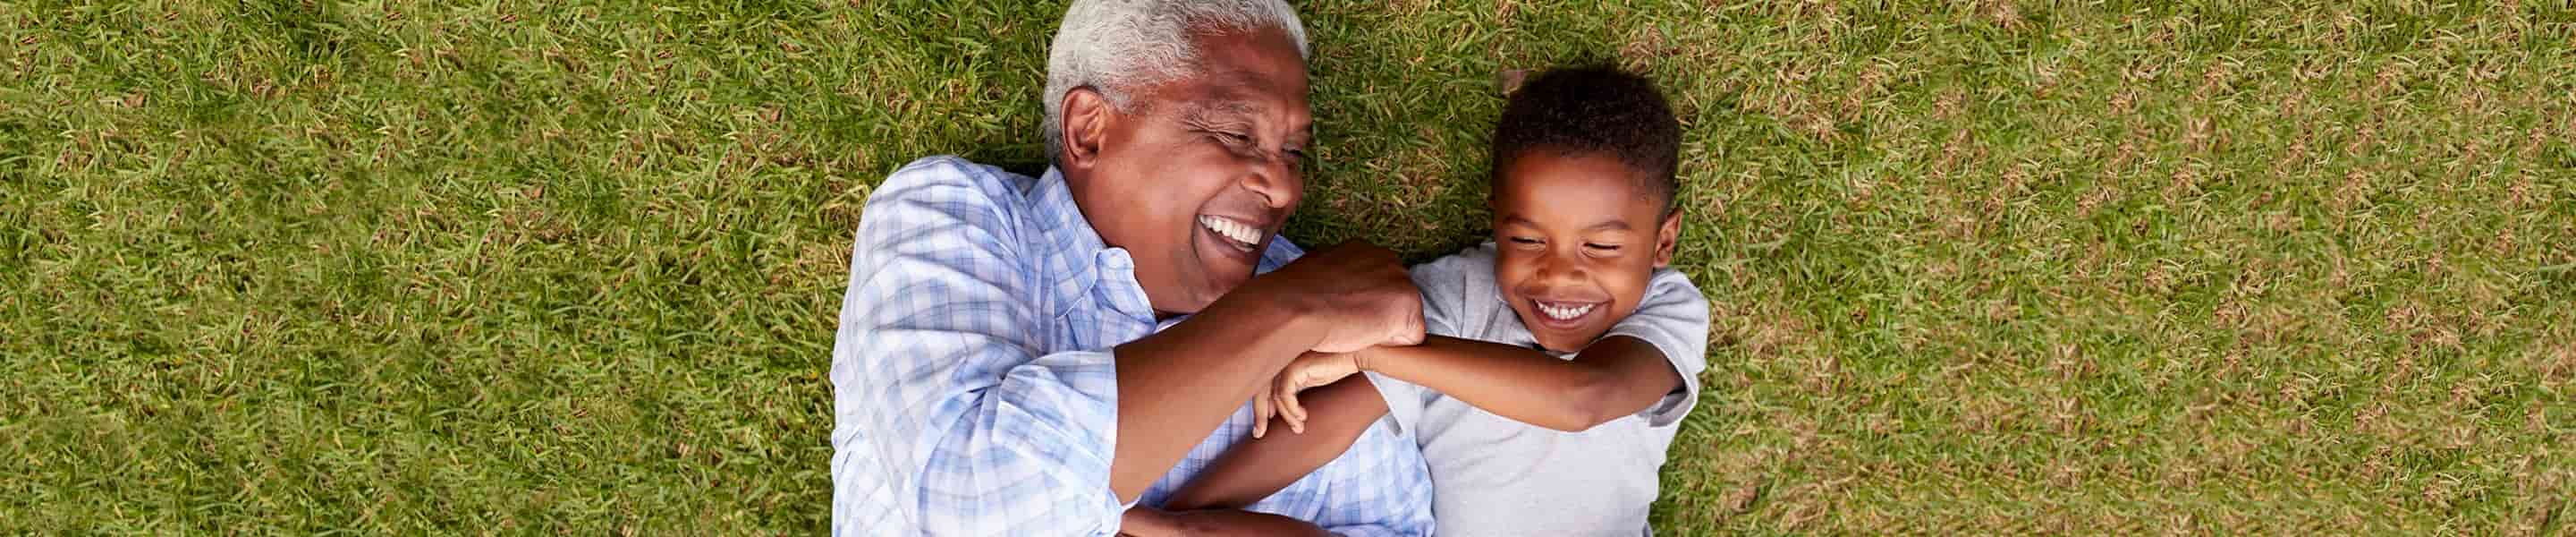 Grandfather and grandson laughing while laying on the grass.